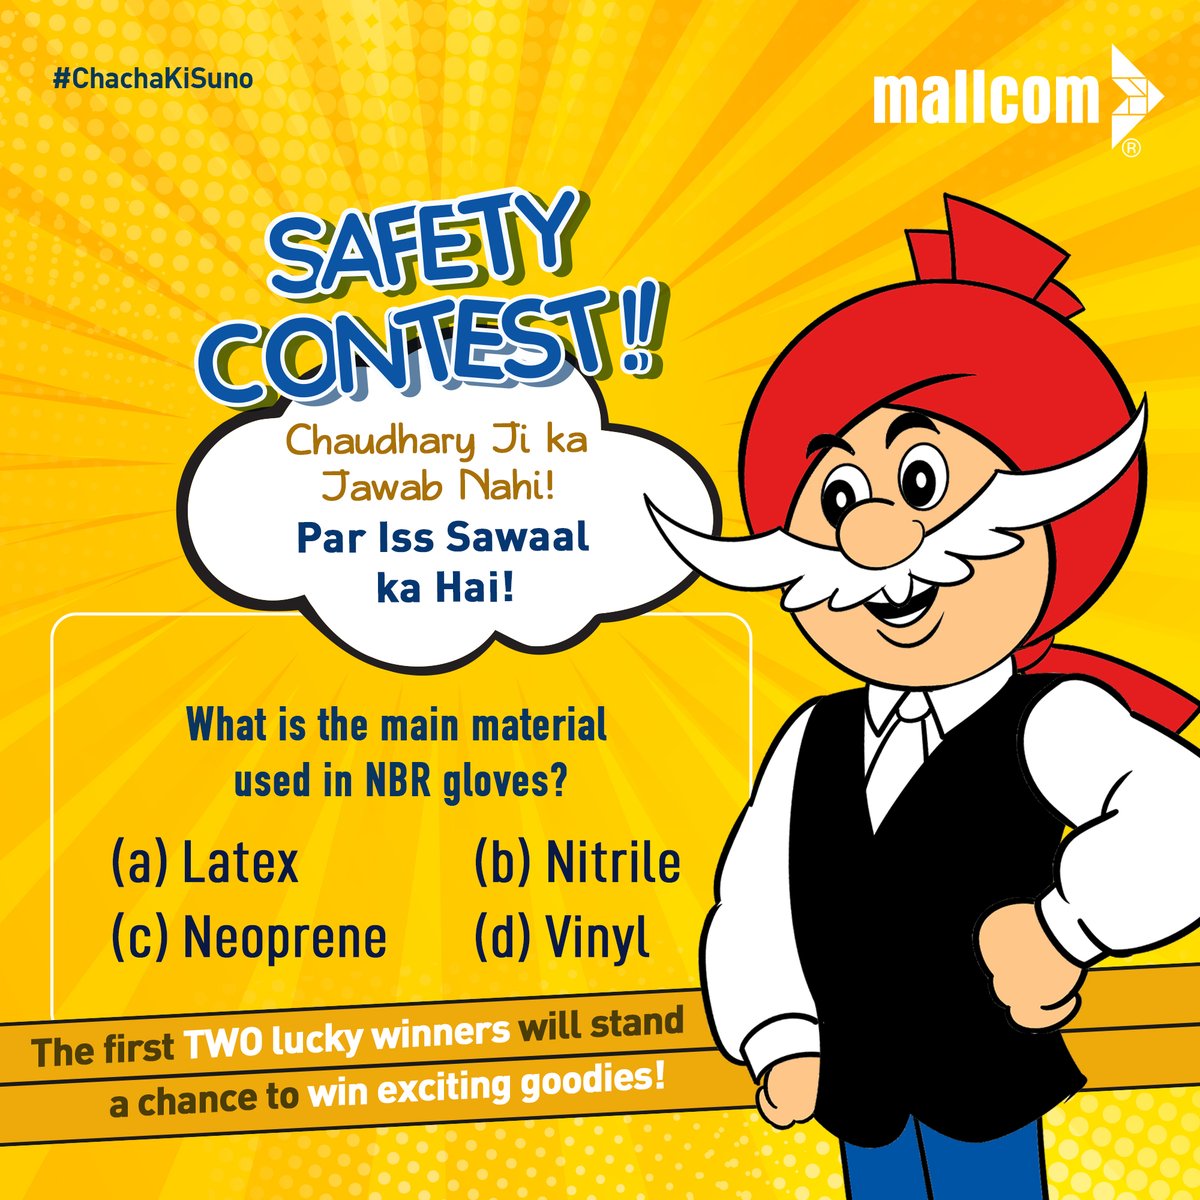 Give the right answer to win big! Two winners will receive amazing prizes! Valid till 15th May! Guess in the comments, follow us, mention 2 friends, and tag us in your story with #ChachaKiSuno. #ChachaKiSuno #ContestAlert #Mallcom #ChachaChaudhary #SafetyContest